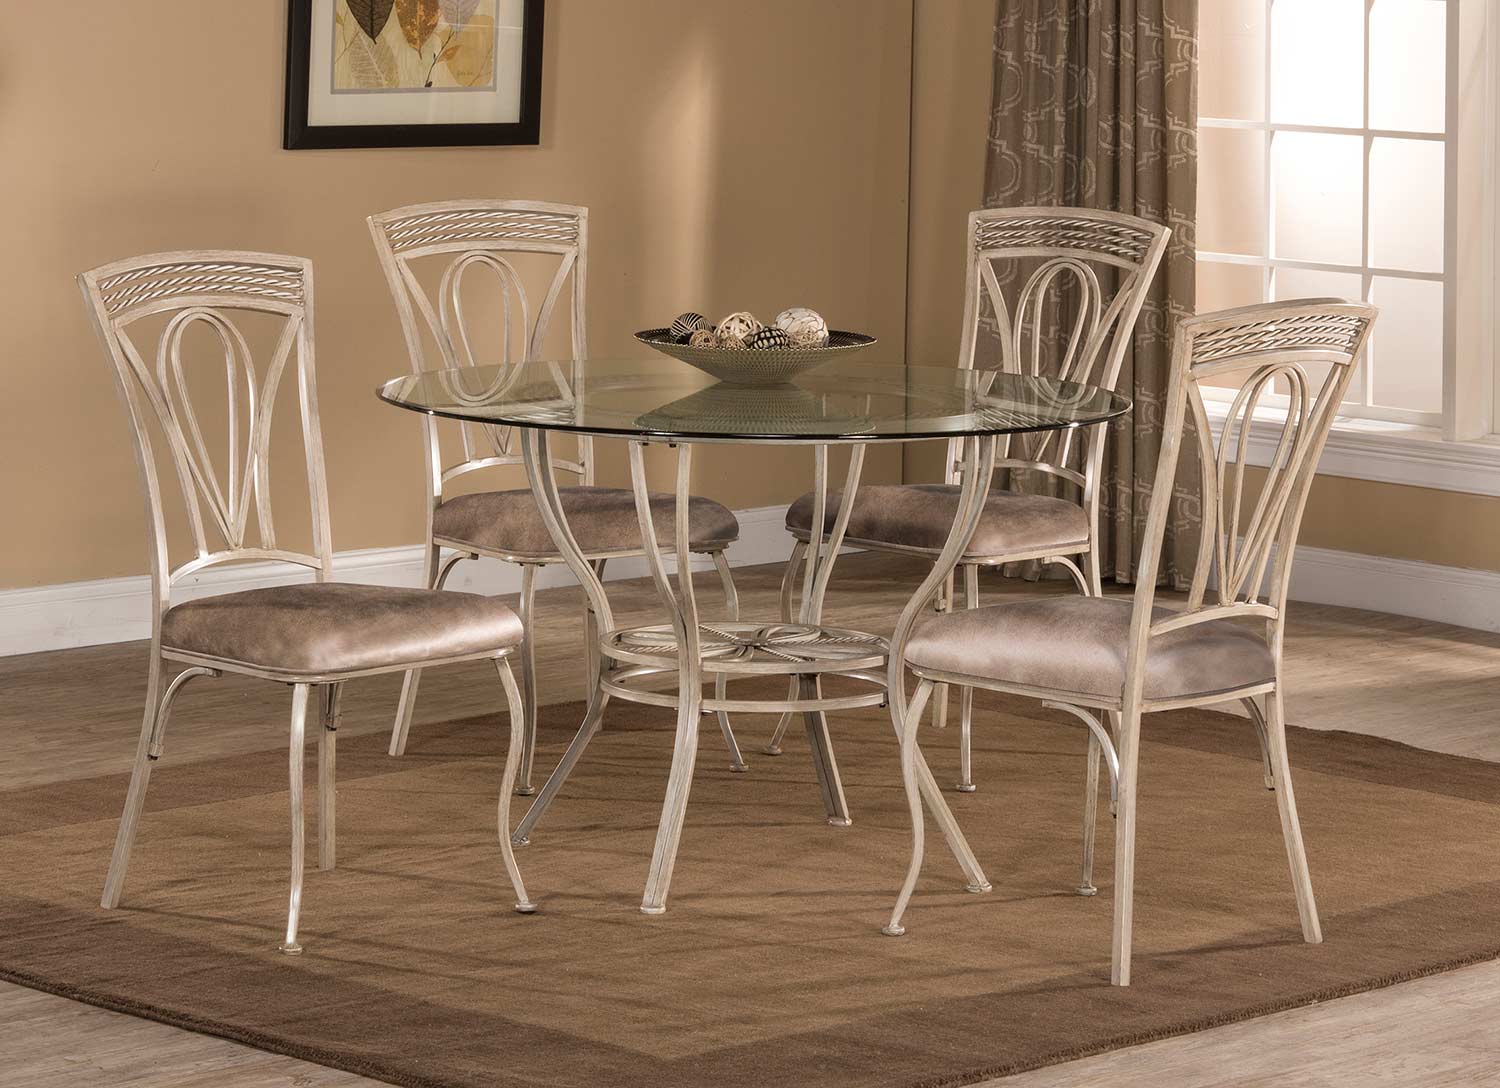 Hillsdale Napier 5-Piece Round Dining Table Set - Aged Ivory